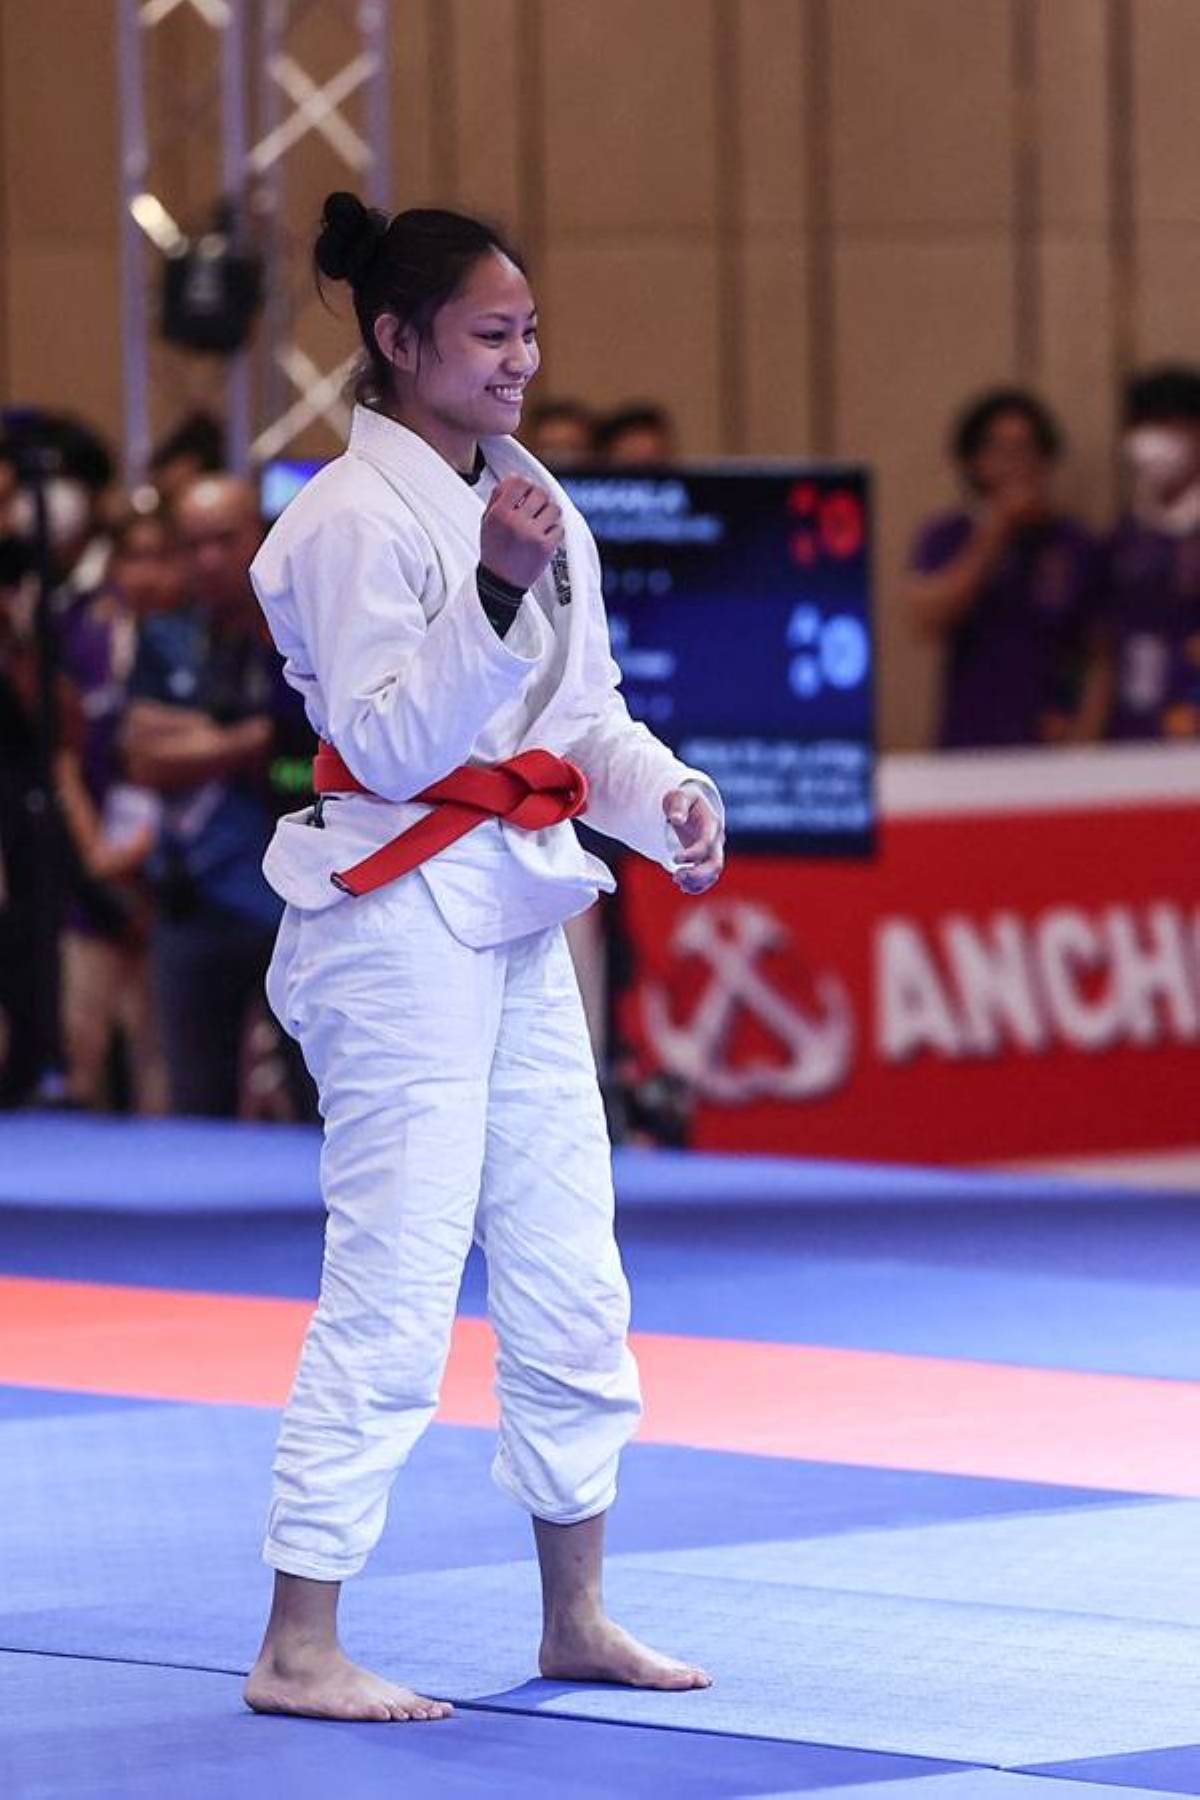 Kaila Napolis of the Philippines reacts after scoring a victory over Thi Huyen of Vietnam in their semifinal duel in jiu-jitsu at the 32nd Southeast Asian Games on Thursday, May 4, in Cambodia. PHOTO BY RIO DELUVIO